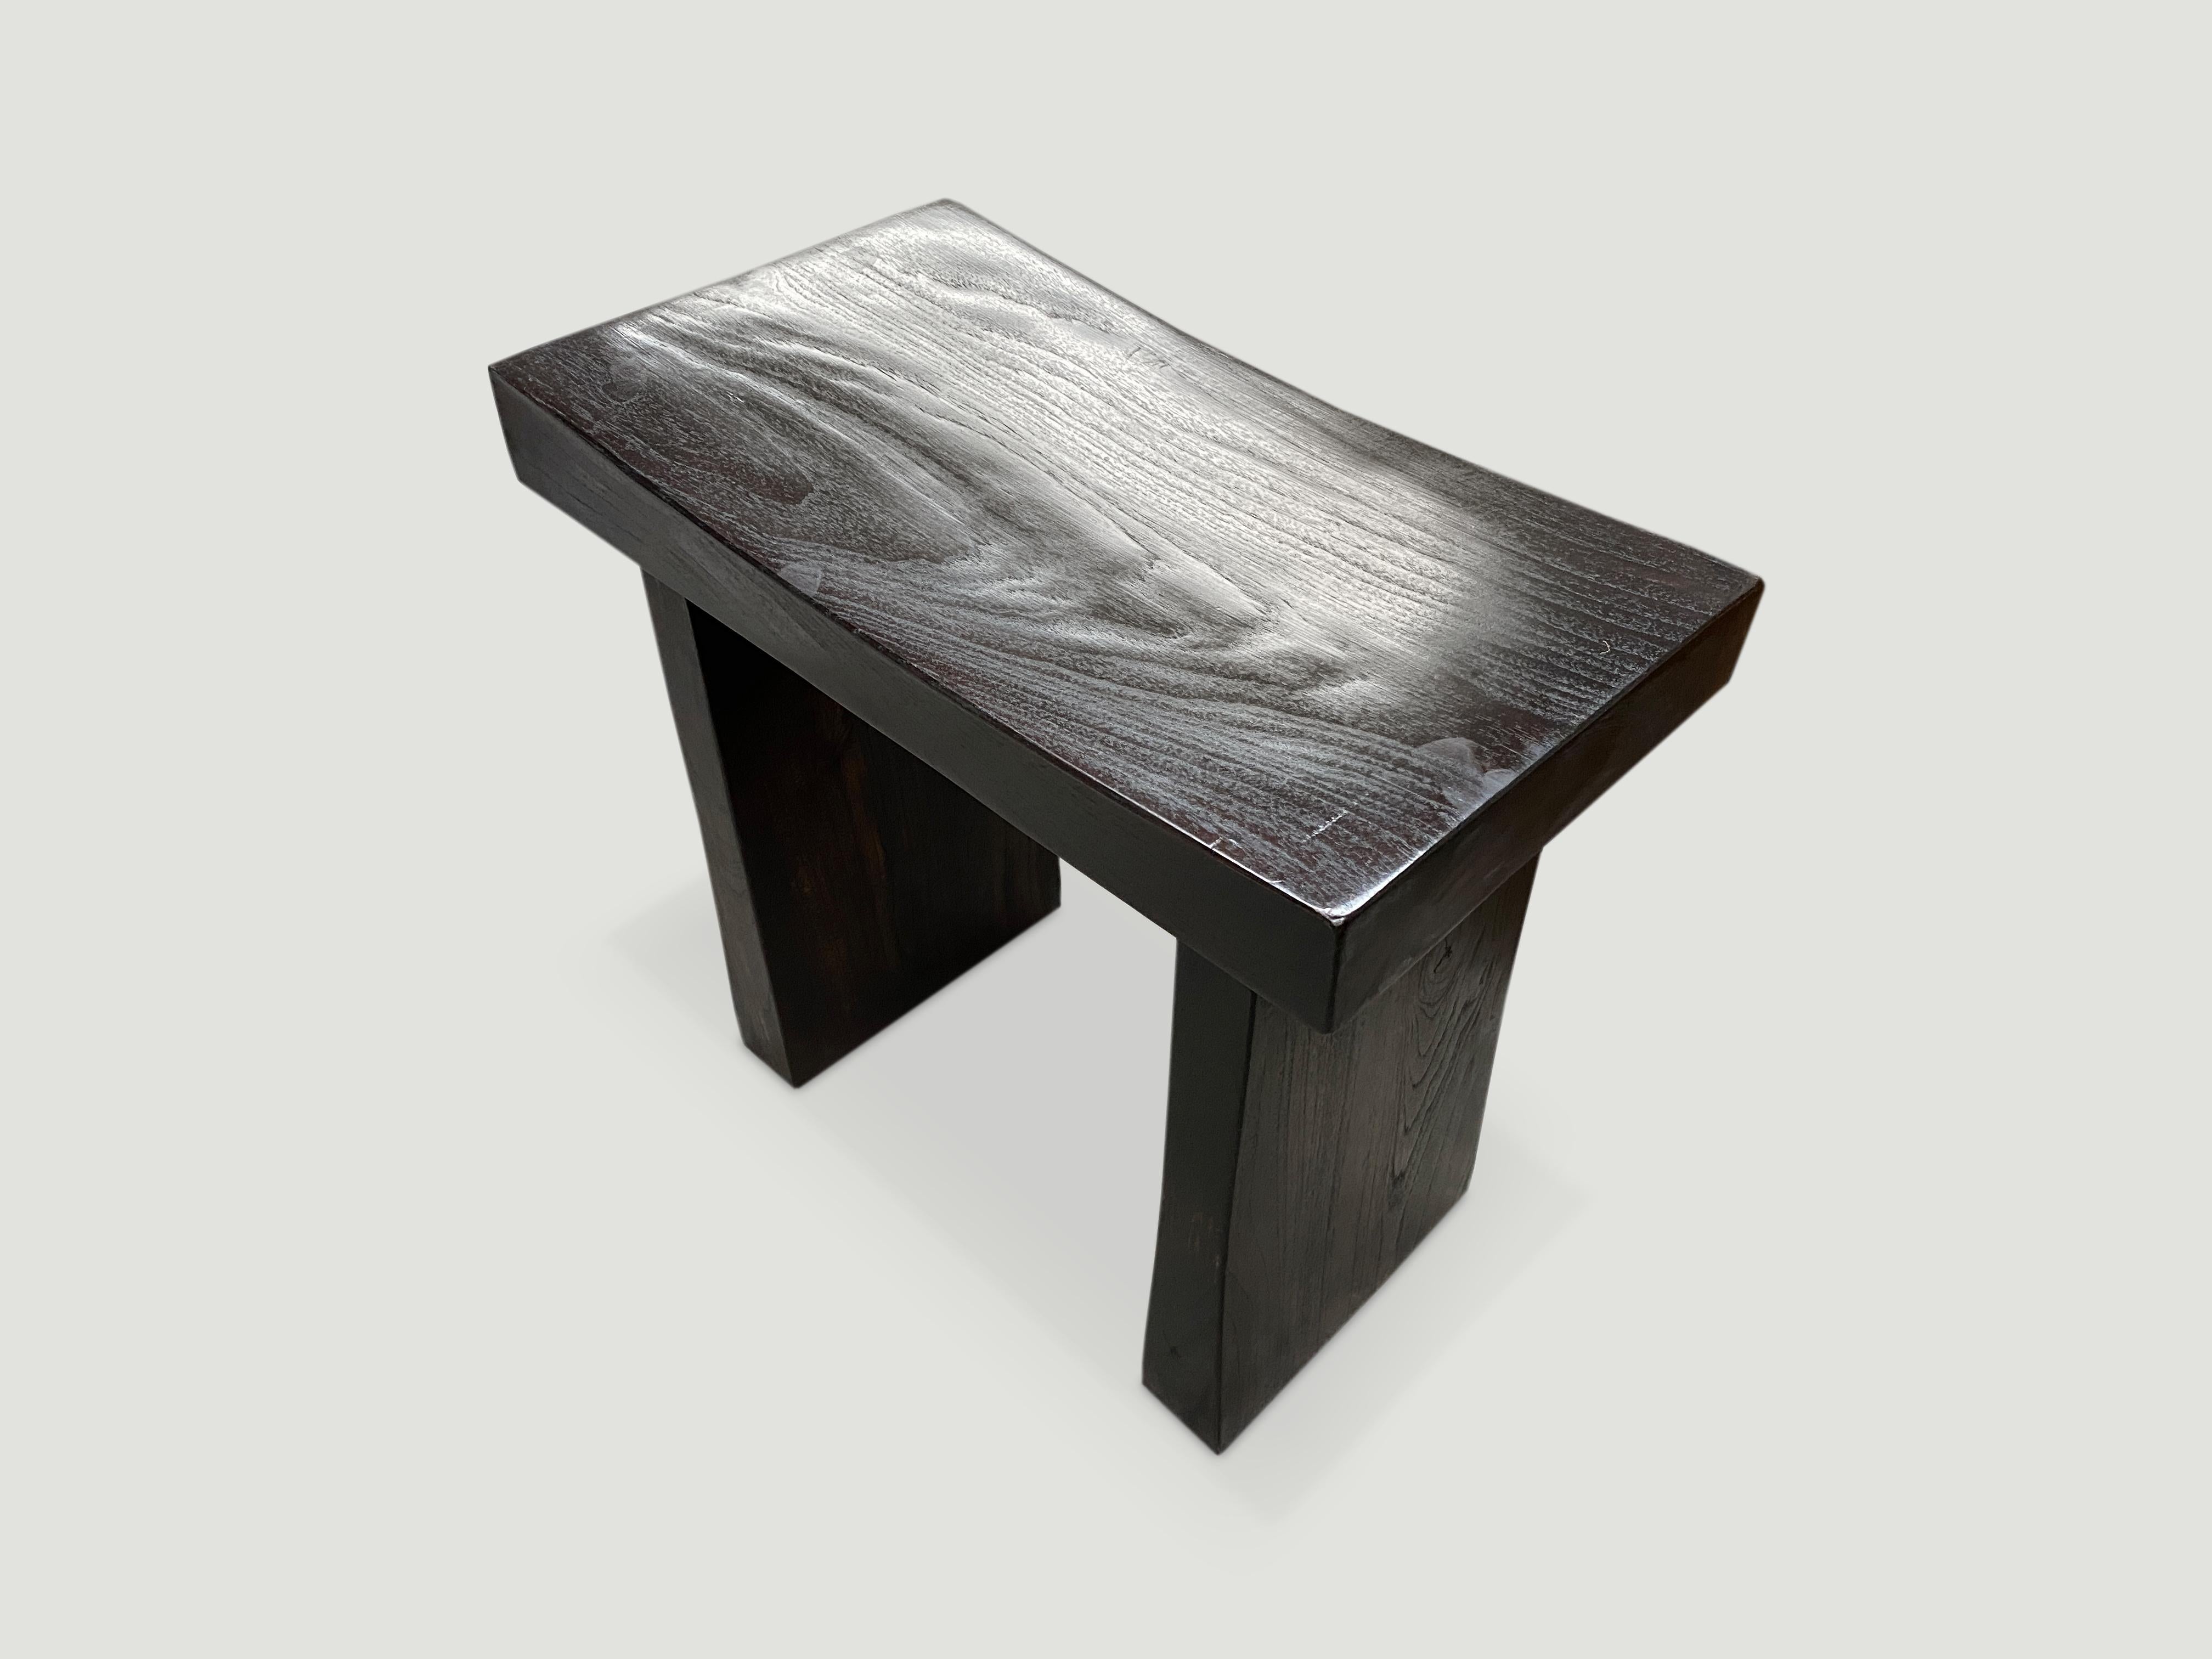 Sleek minimalist bench. Handmade from a thick single slab of reclaimed teak and finished with an espresso stain revealing the grain of the wood. Custom sizes and stains available.

Andrianna Shamaris. The Leader In Modern Organic Design.